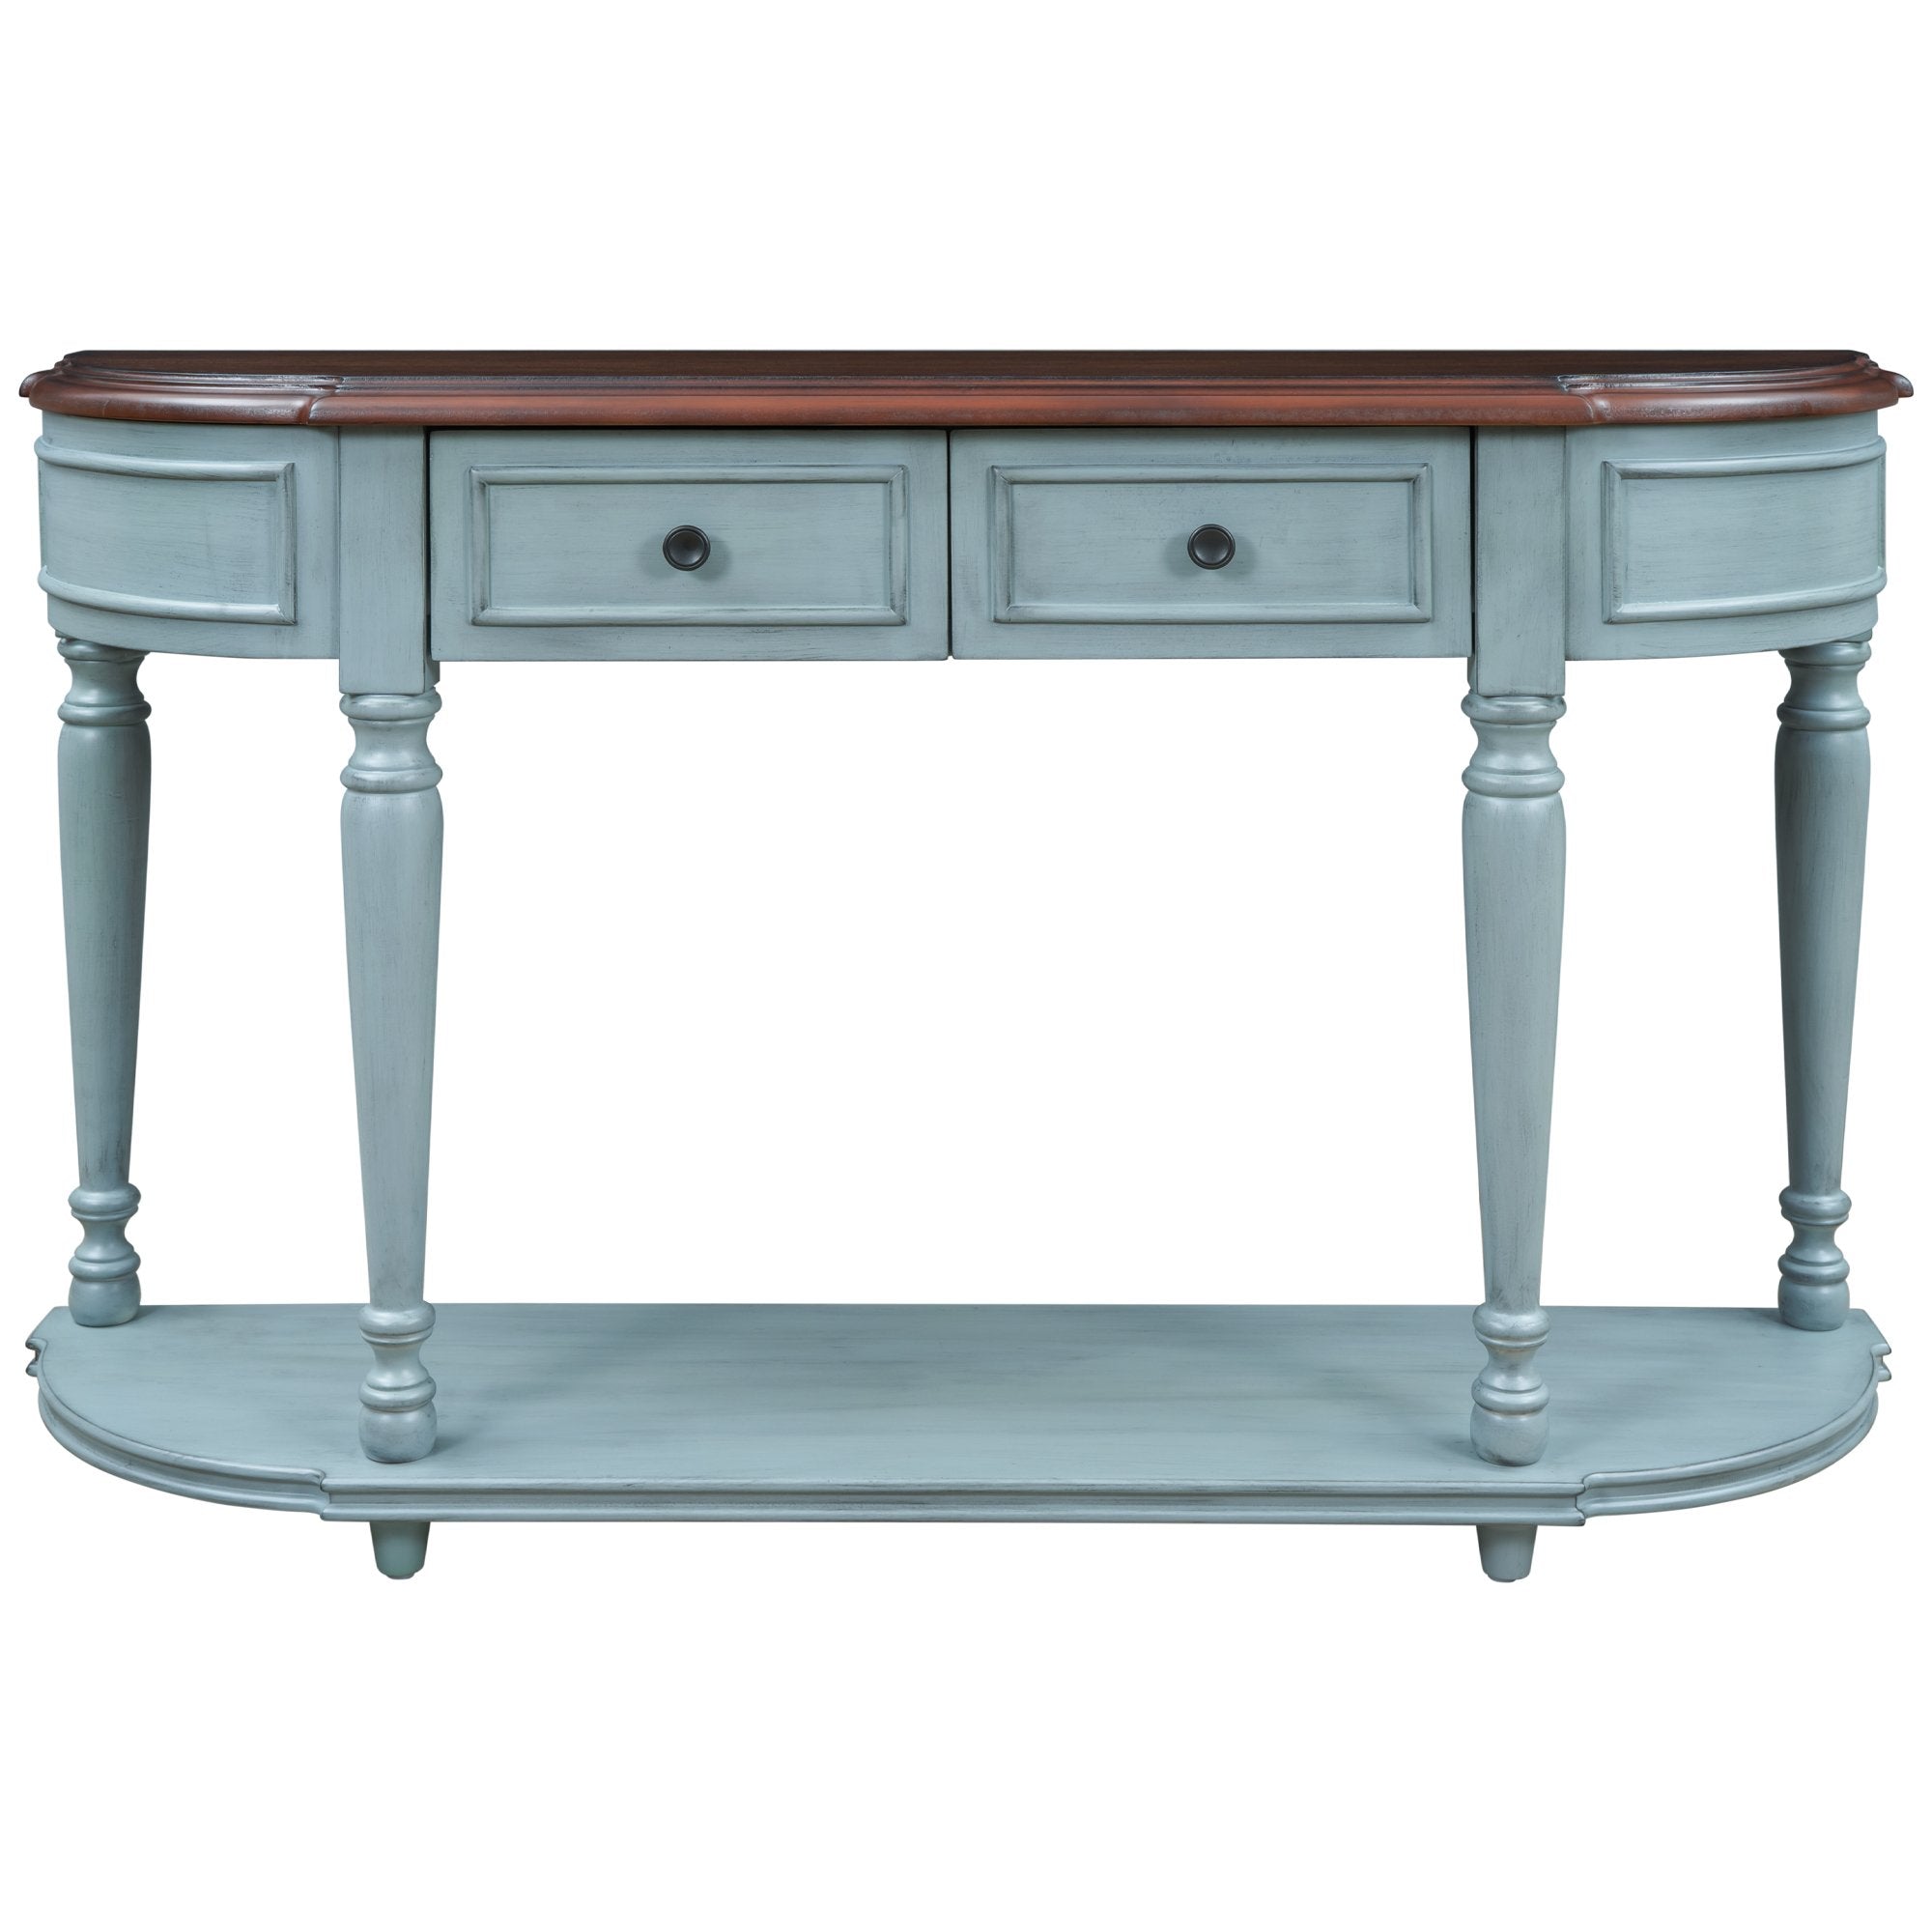 Retro Circular Curved Design Console Table with Open Style Shelf Solid Wooden Frame and Legs Two Top Drawers